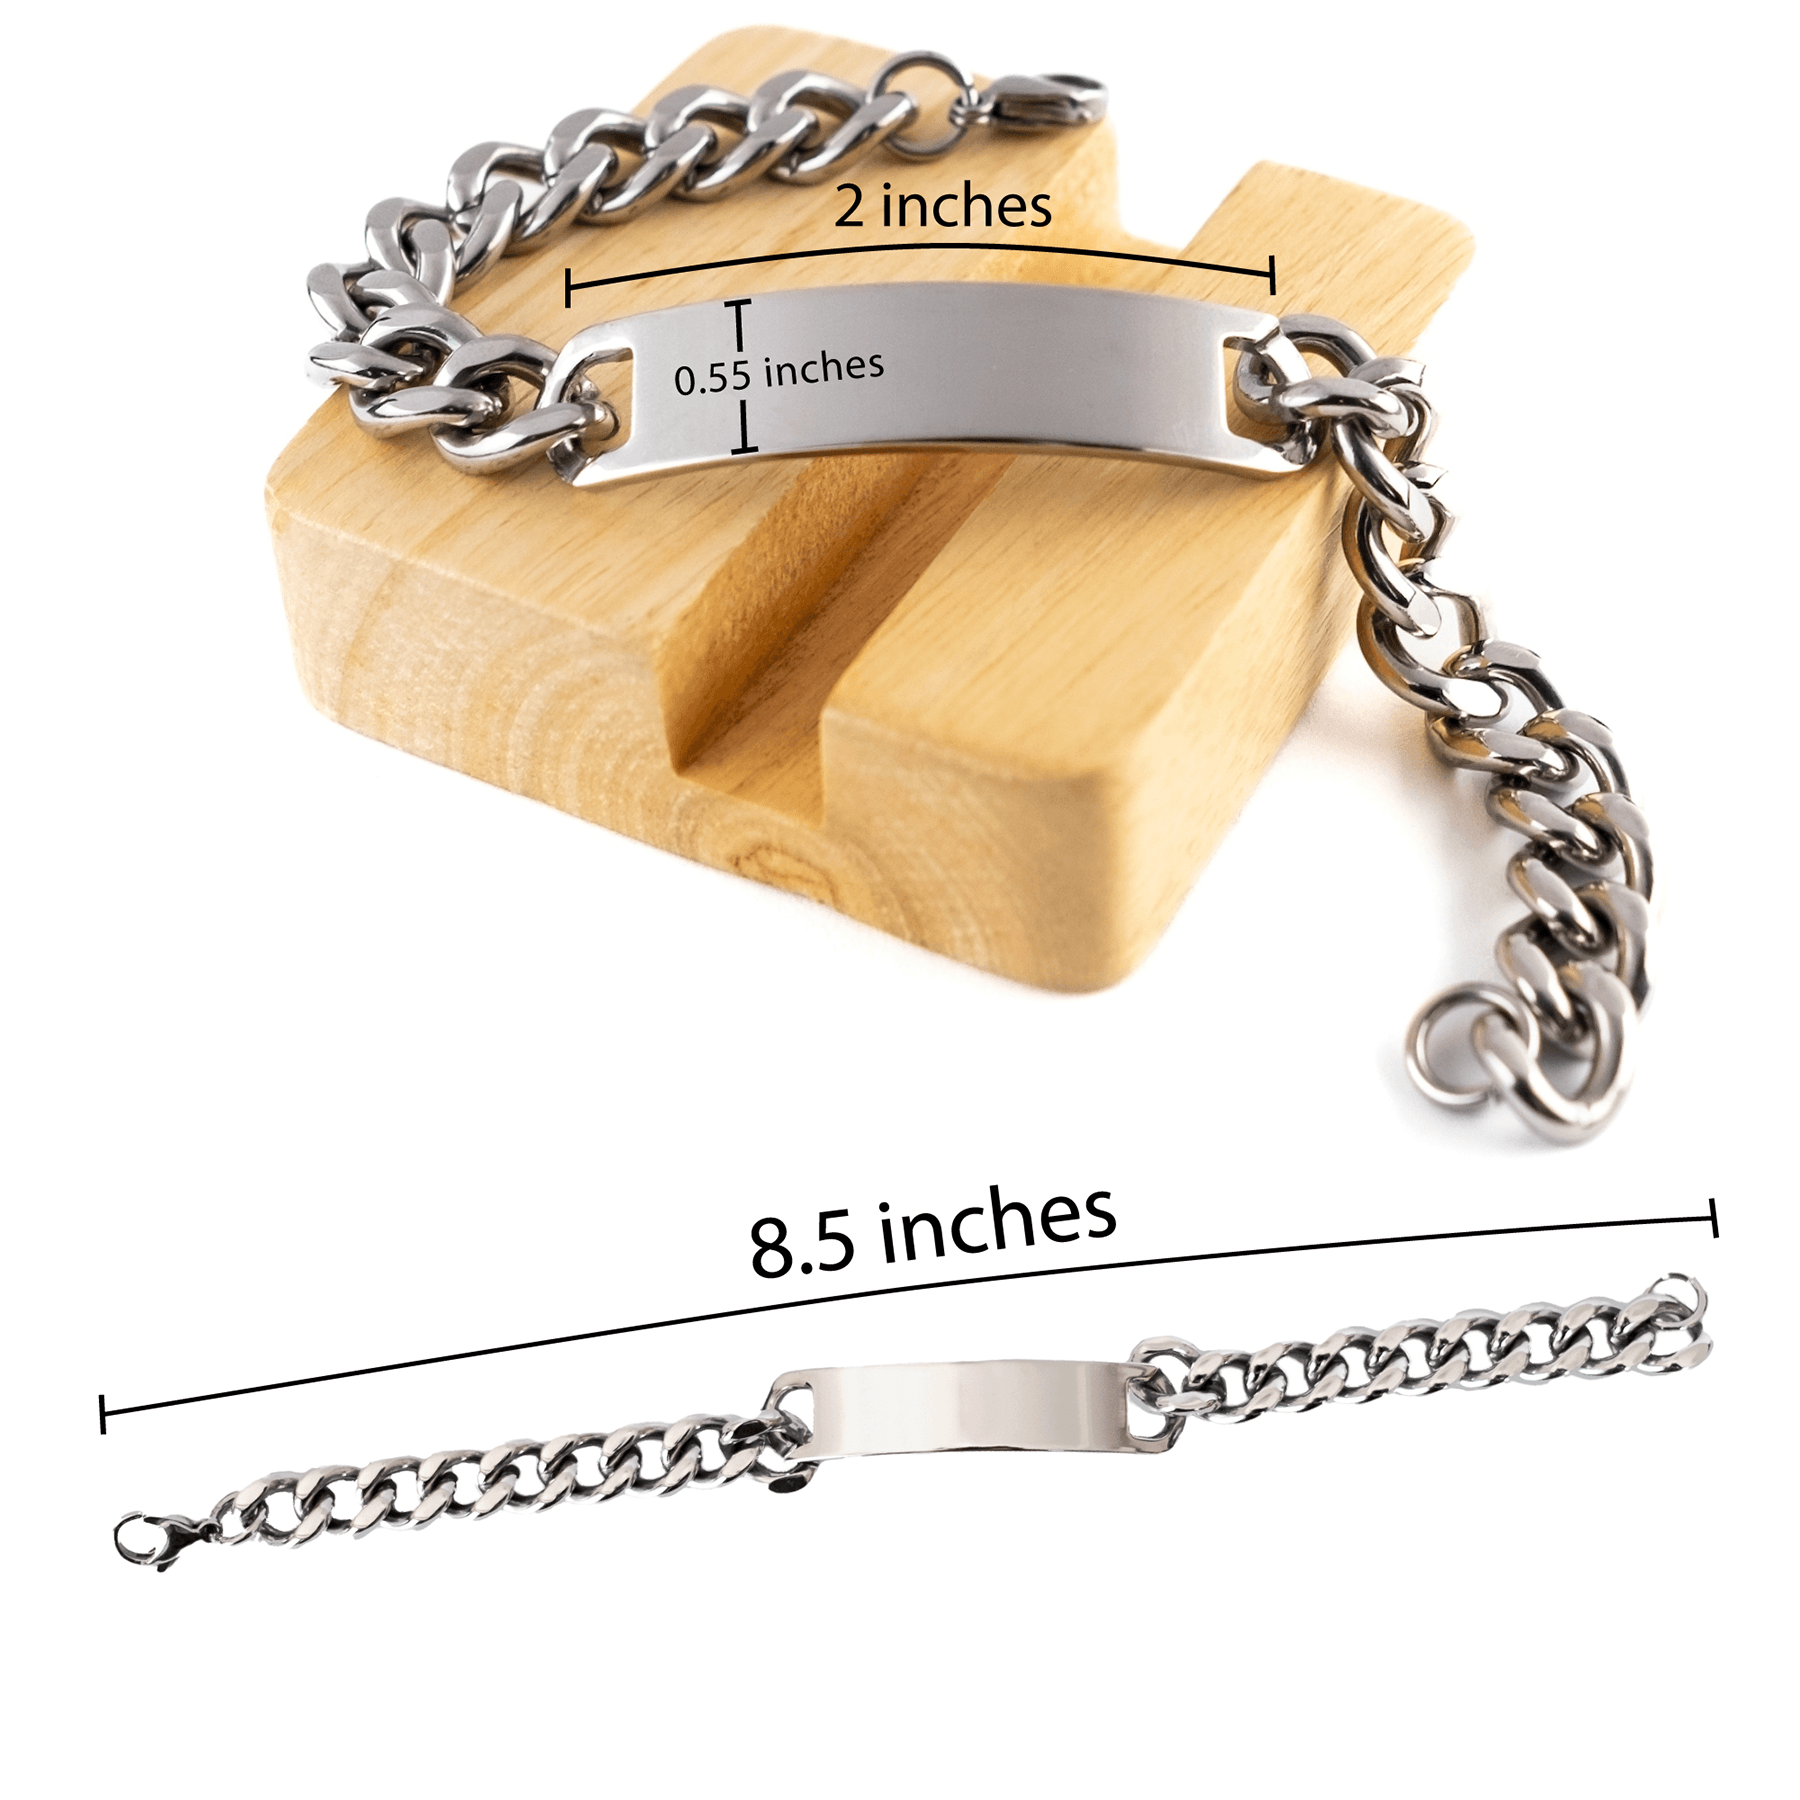 Model Cuban Chain Link Engraved Bracelet - Thanks for being who you are - Birthday Christmas Jewelry Gifts Coworkers Colleague Boss - Mallard Moon Gift Shop